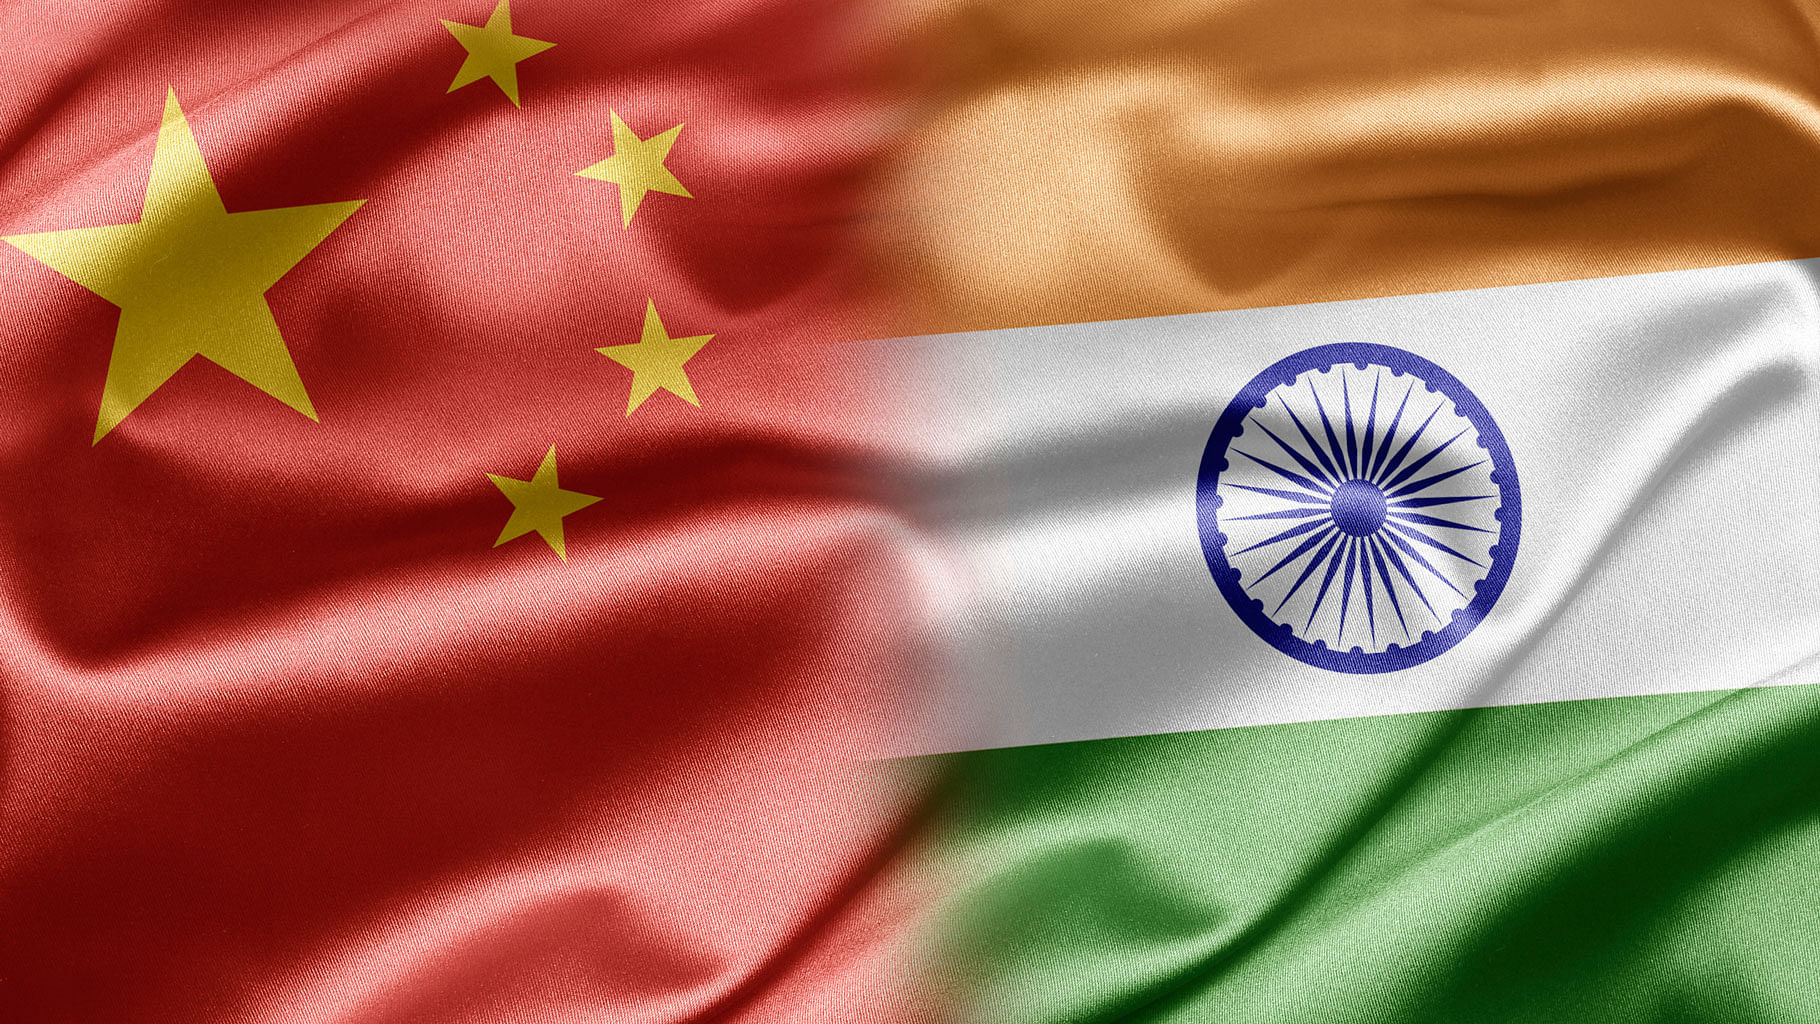 The remarks coincide with Defence Minister Manohar Parrikar’s visit to China. (Photo: iStockphoto)